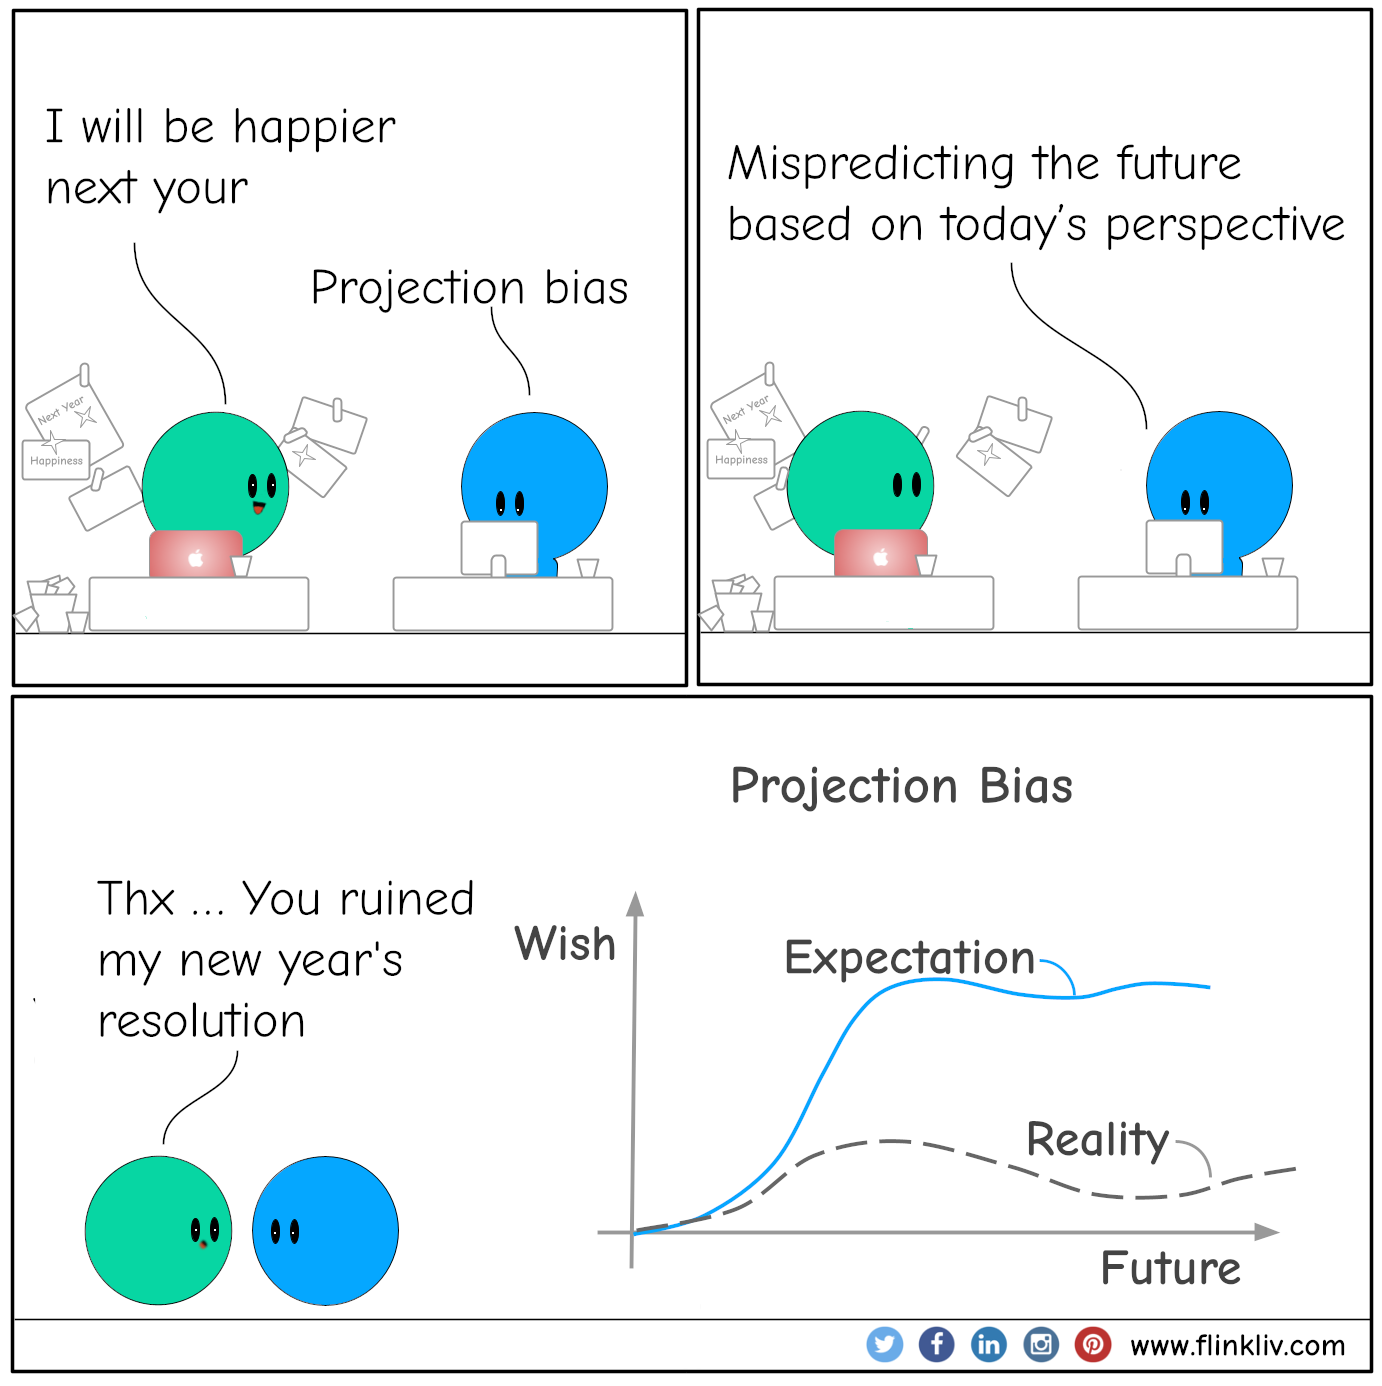 Conversation between A and B about projection bias. A: I will be happier next your B: Projection bias B: Mispredicting the future based on today's perspective A: You ruined my new year's resolution.
				By Flinkliv.com